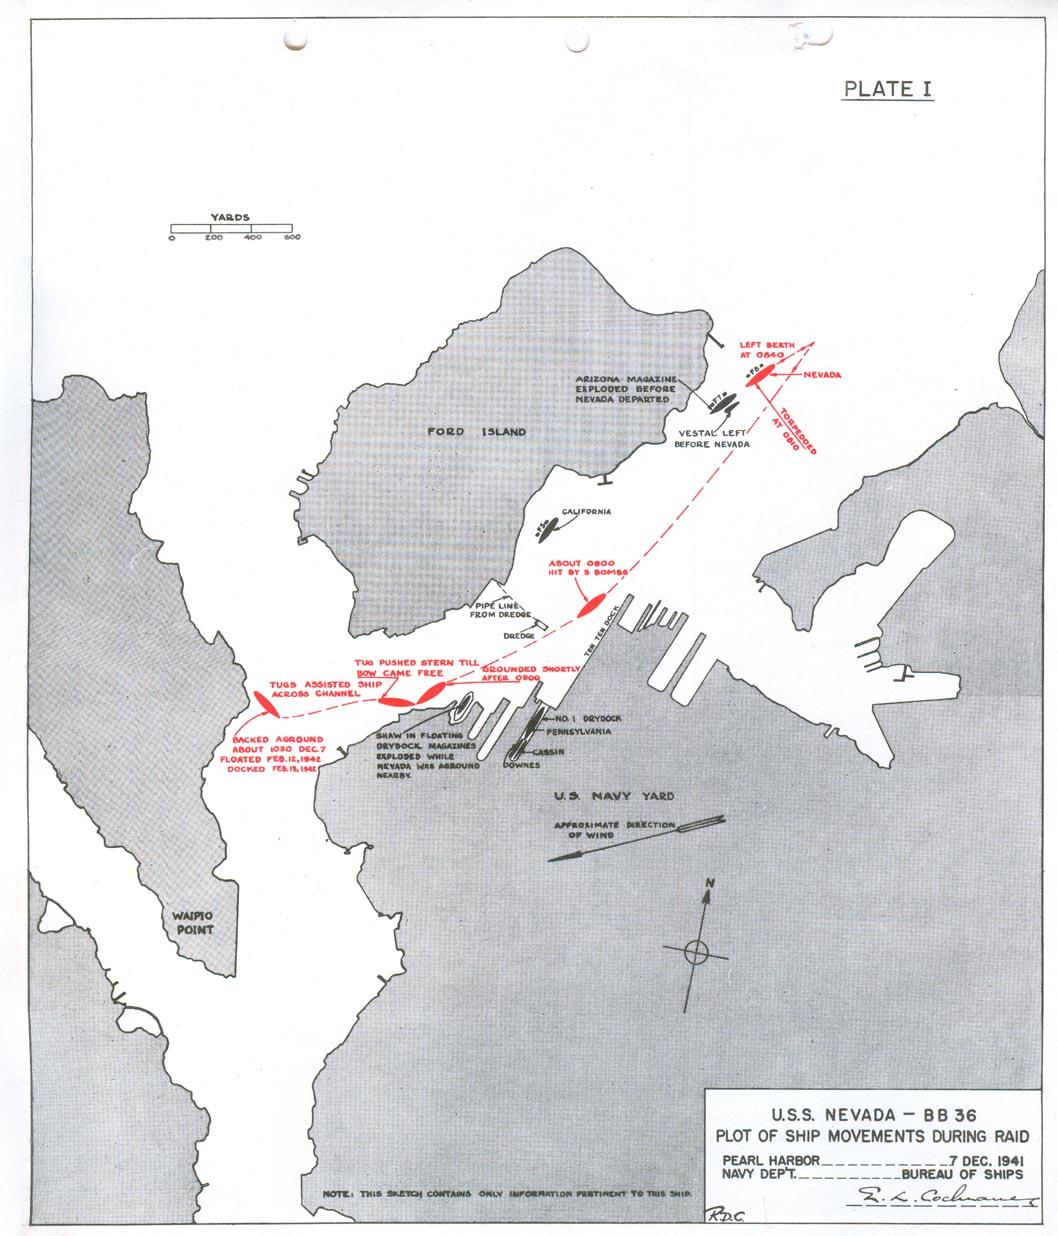 Plot of USS Nevada's movements during the Pearl Harbor attack, Dec 7 1941.